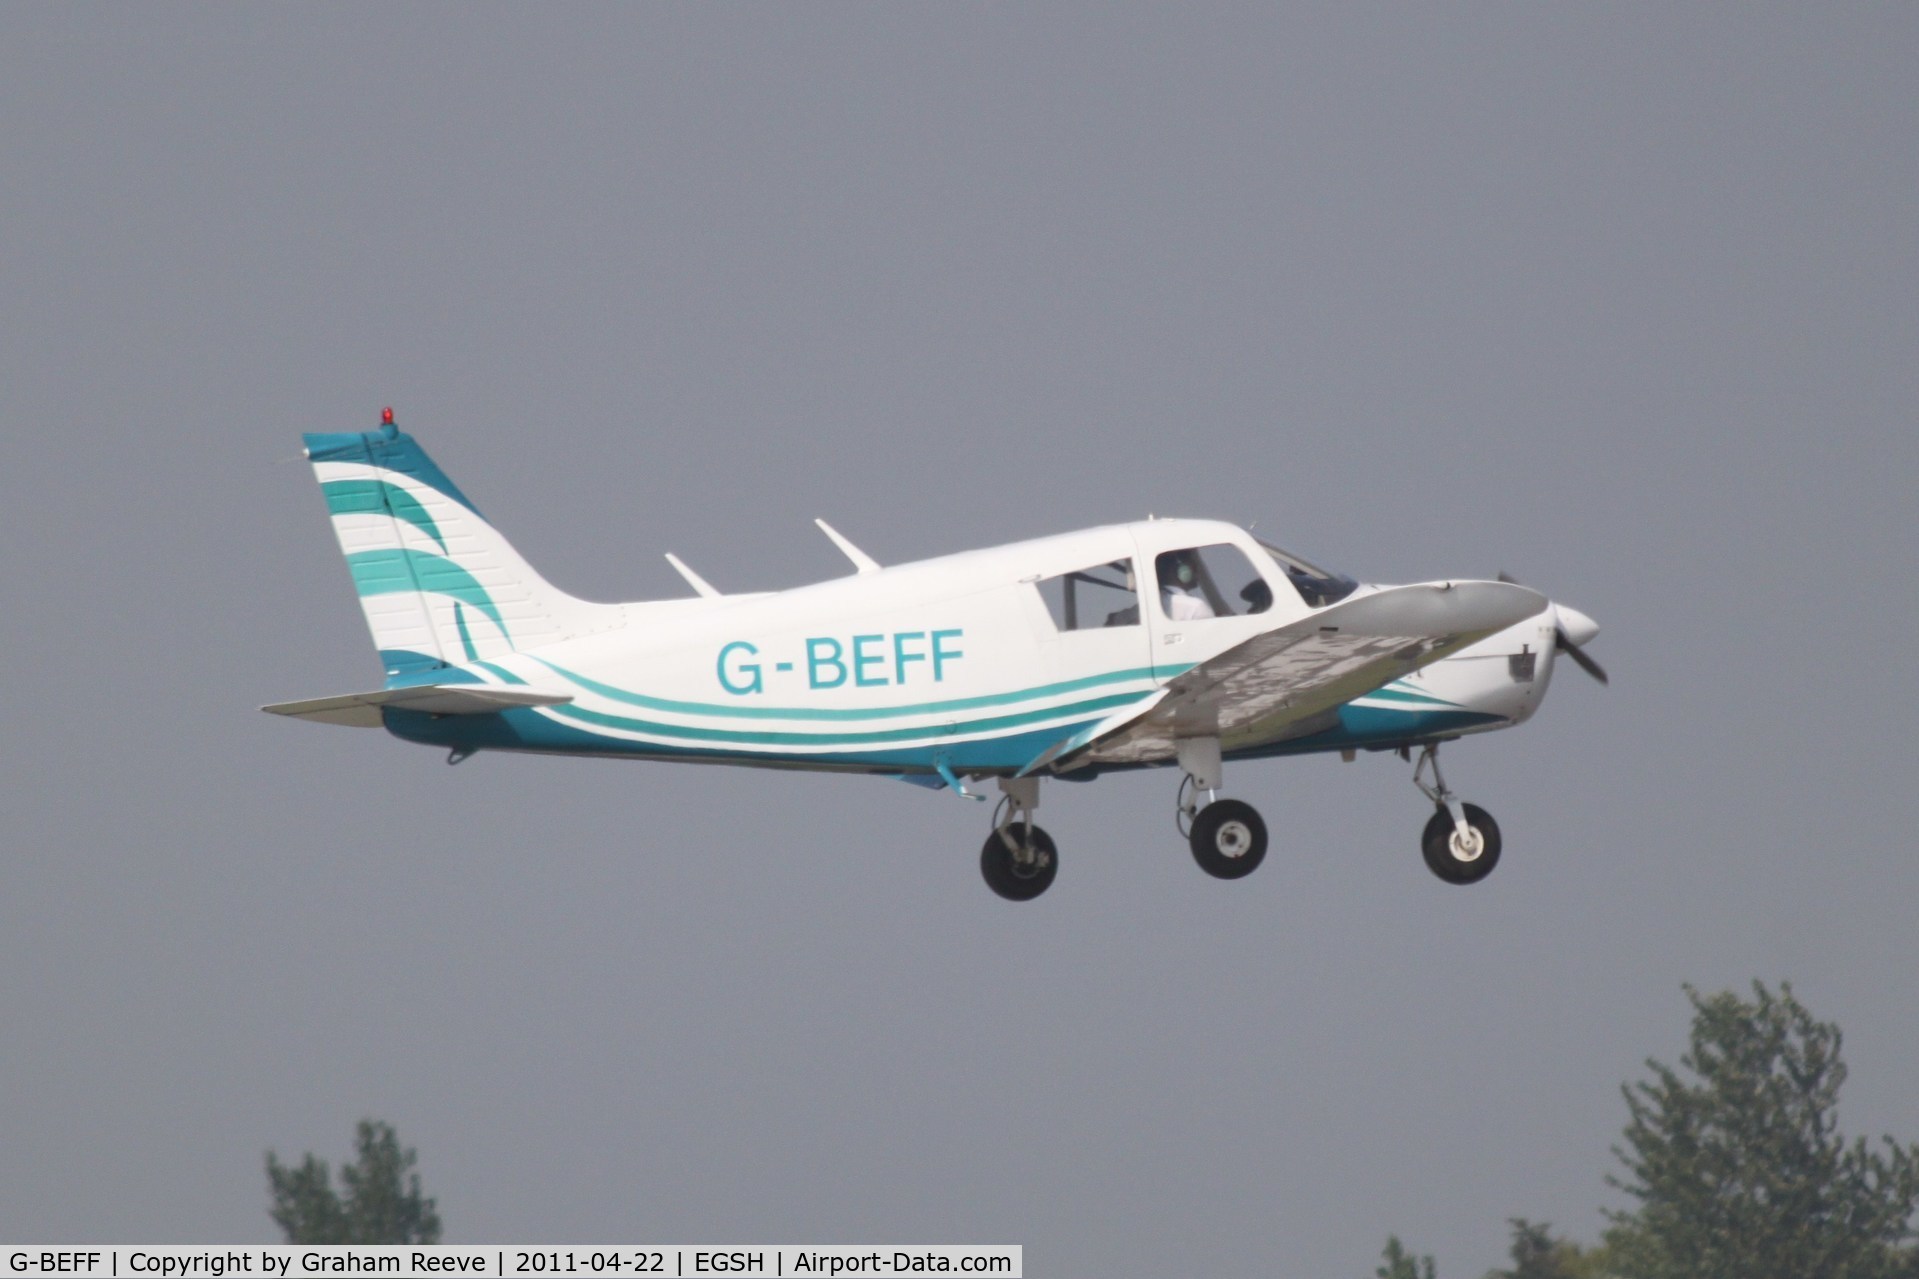 G-BEFF, 1973 Piper PA-28-140 Cherokee F C/N 28-7325228, About to touch down.